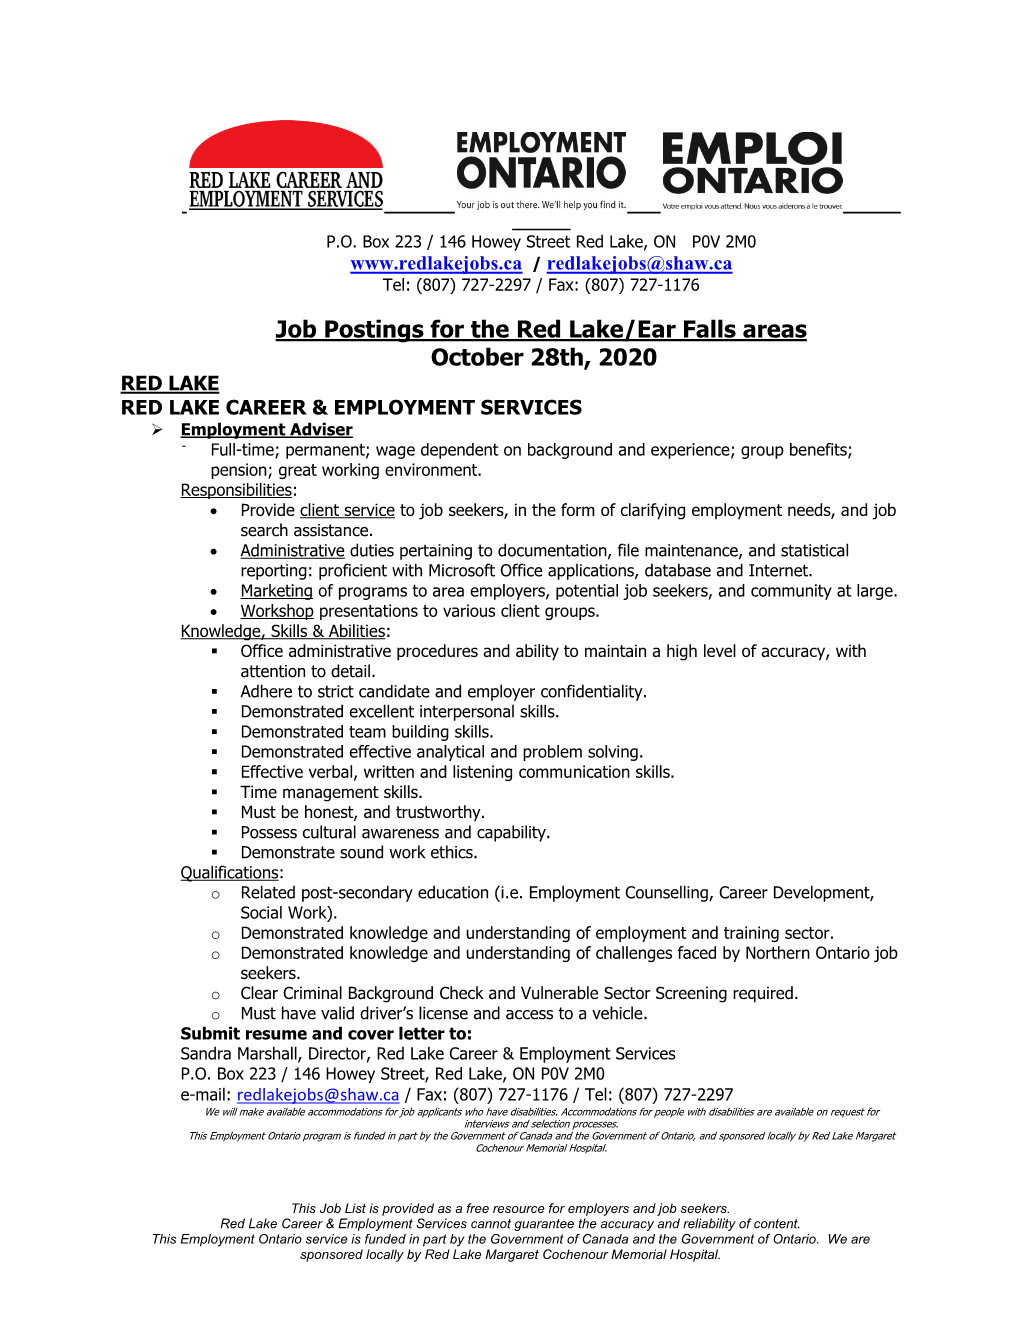 Job Postings for the Red Lake/Ear Falls Areas October 28Th, 2020